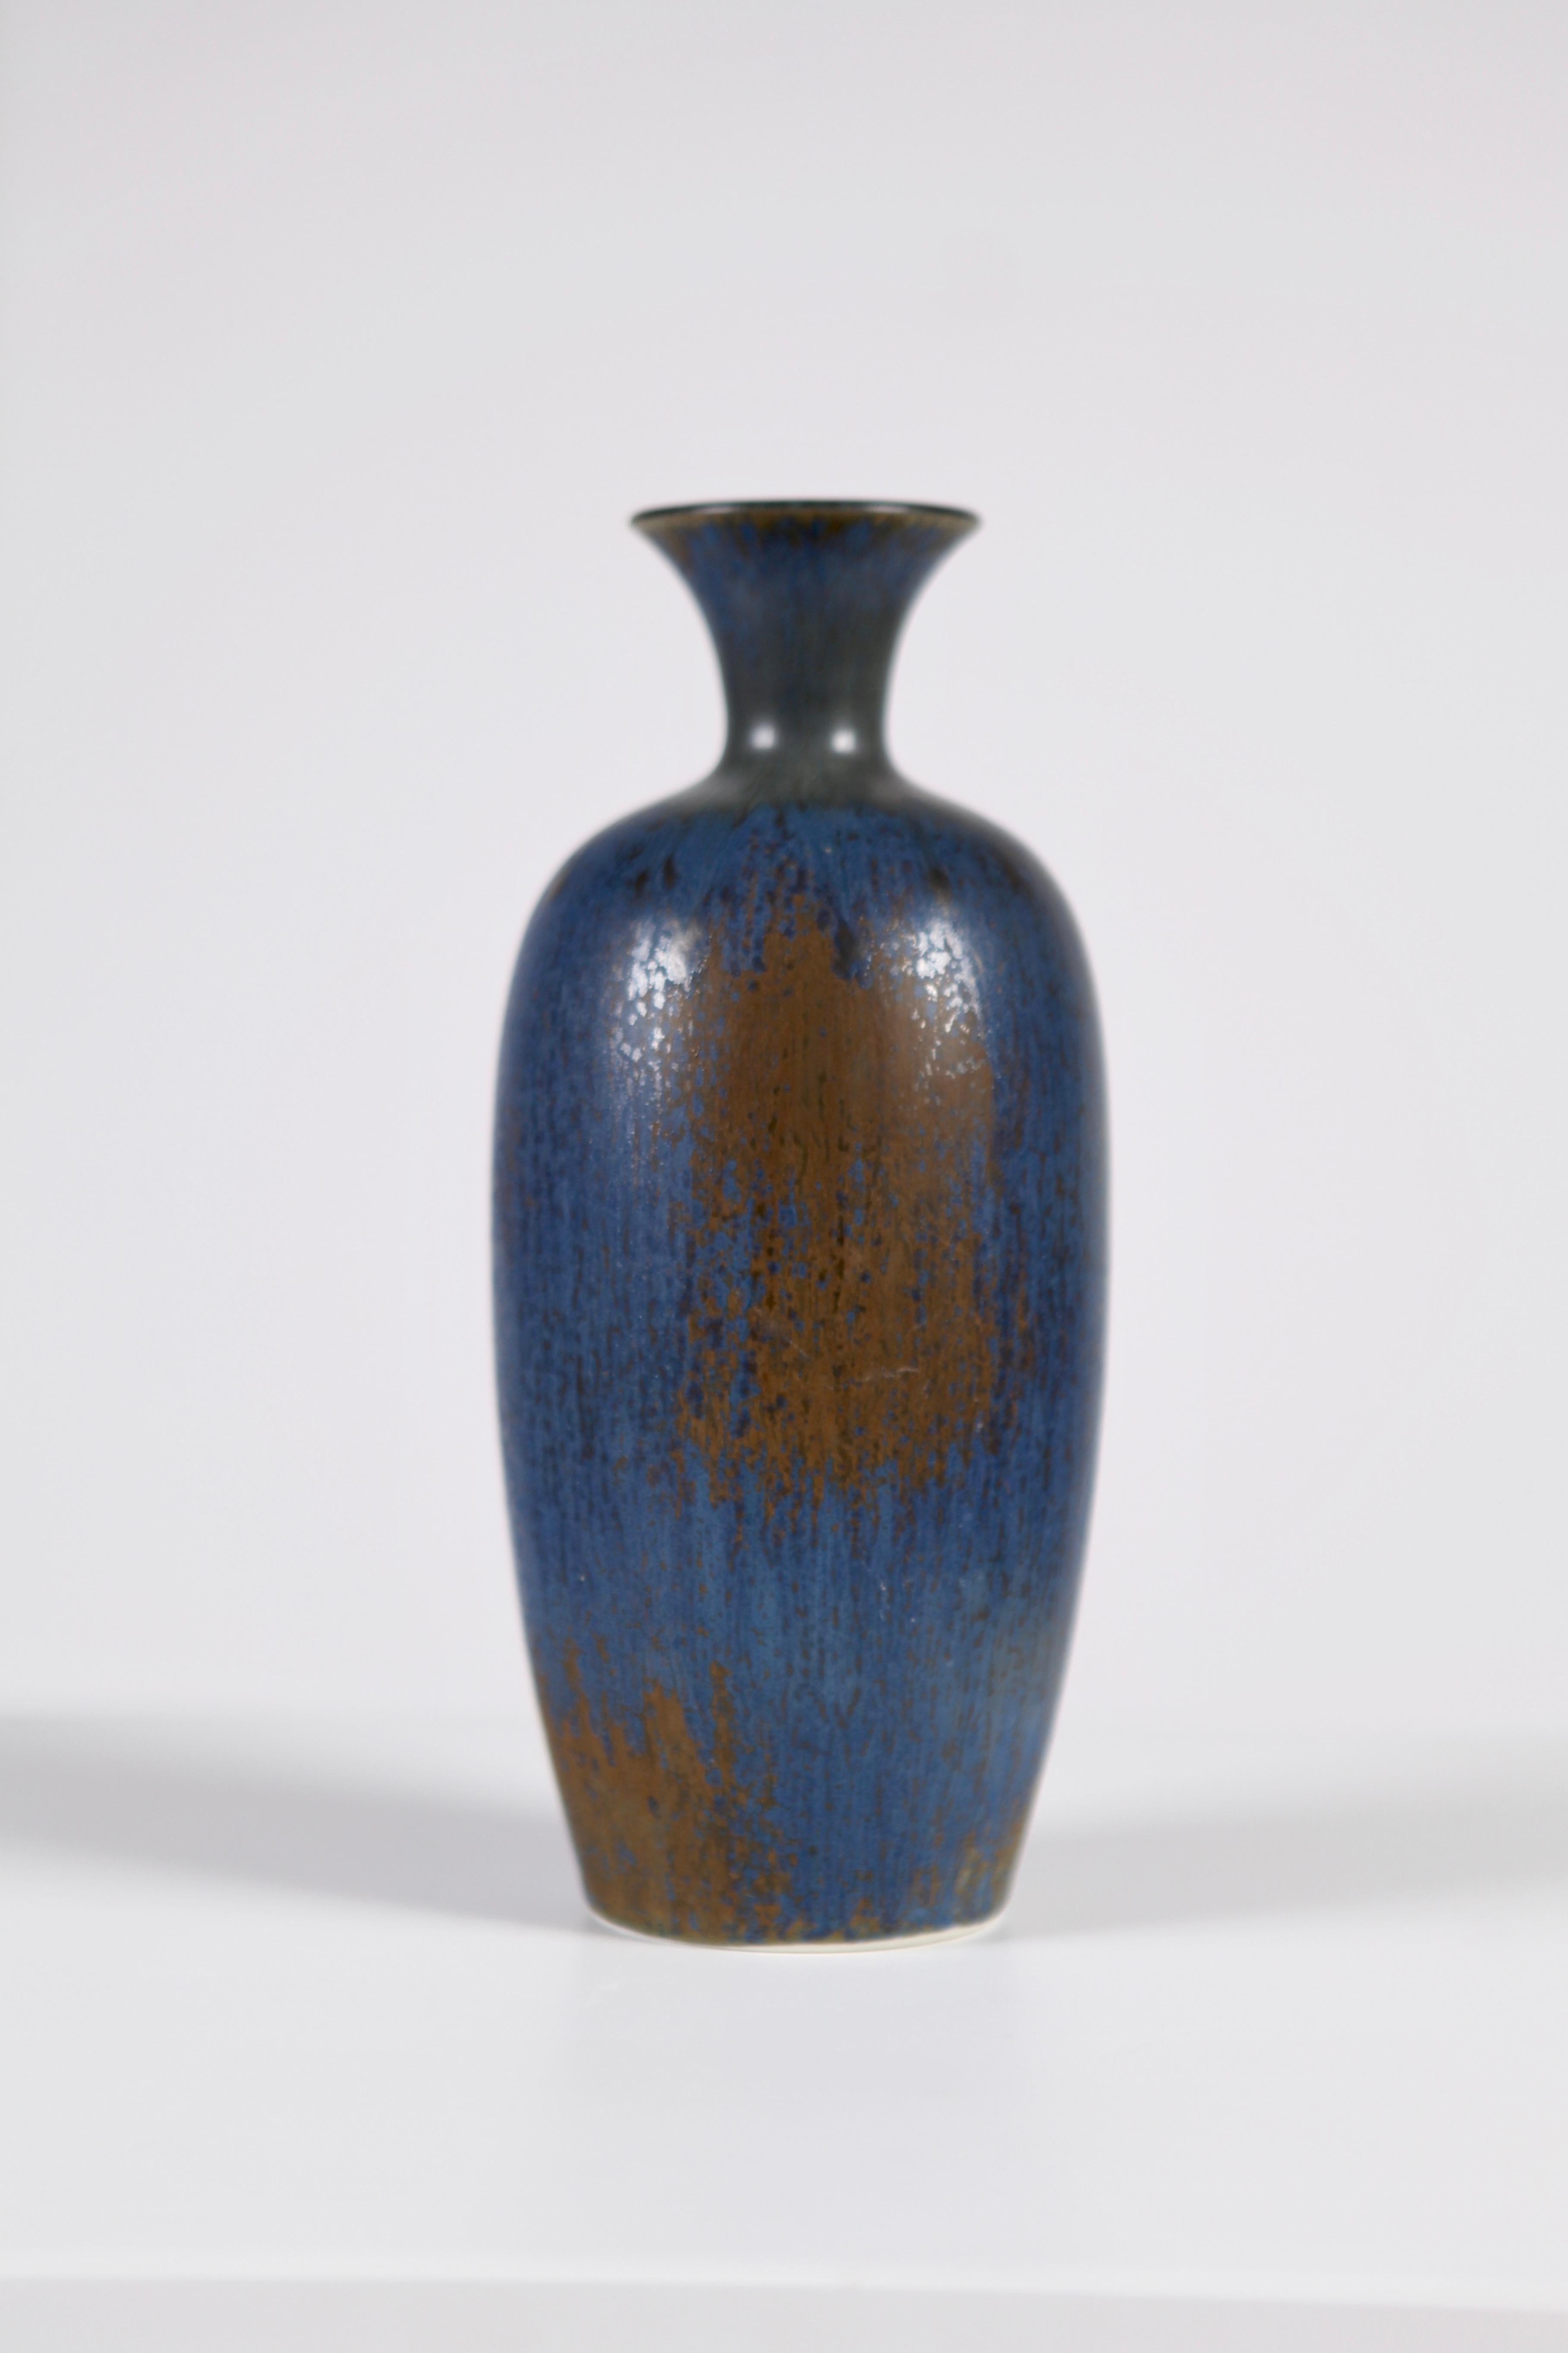 Unique stoneware vase with blue or brown haresfur glaze by Swedish artist Sven Wejsfelt (1930-2009).
Gustavsberg Studio hand incised G Sven, unik, 1989.
Perfect condition.
S.W. worked in a Classic stoneware tradition with thinly thrown shapes and